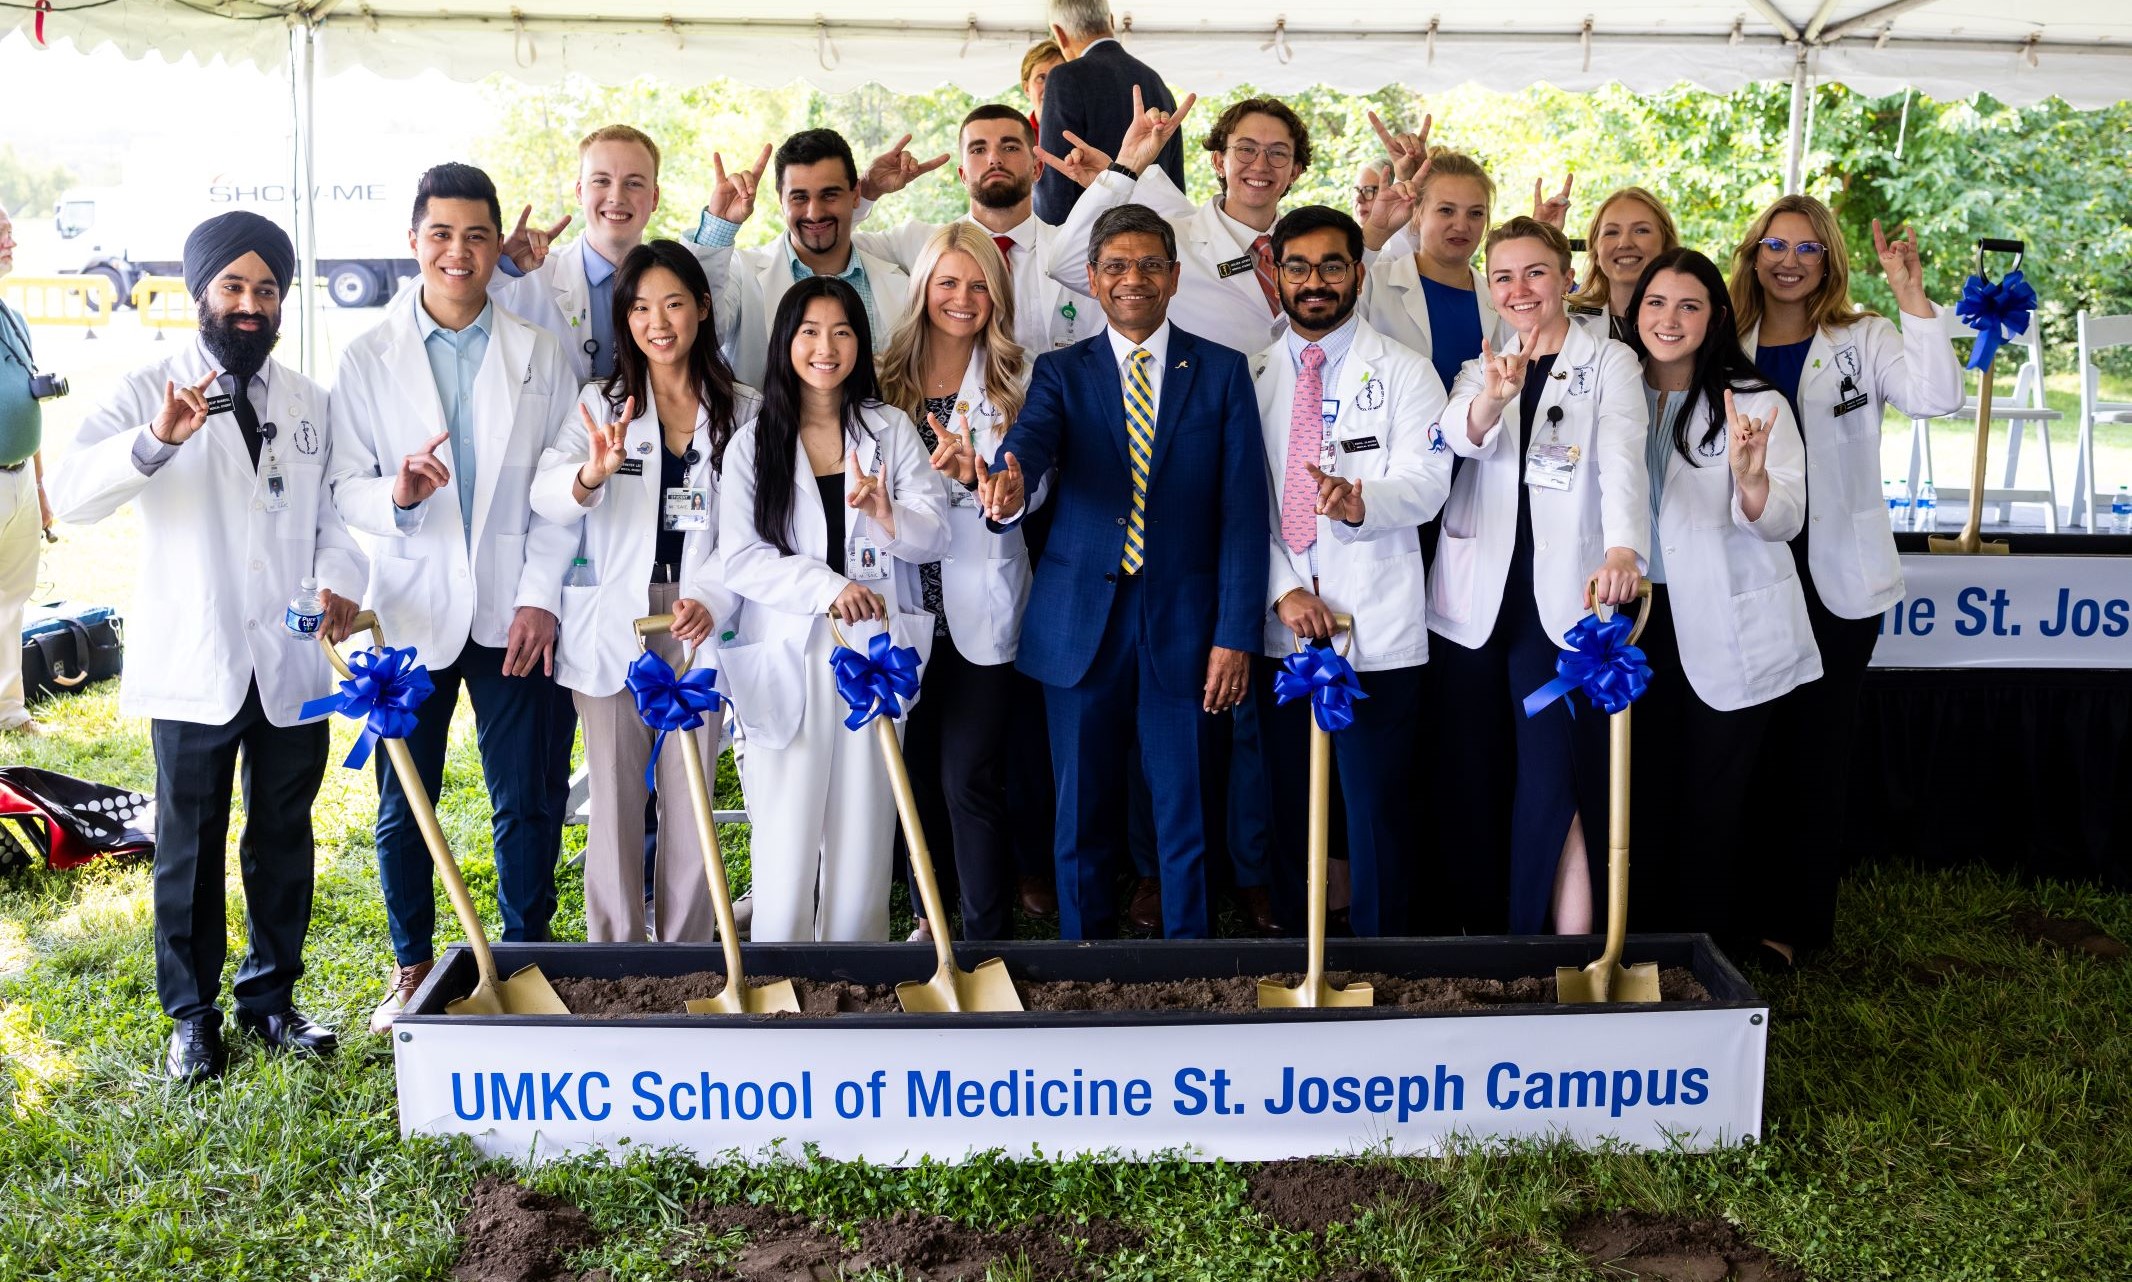 Chancellor Agrawal and approximately 15 medical students participate in a groundbreaking ceremony